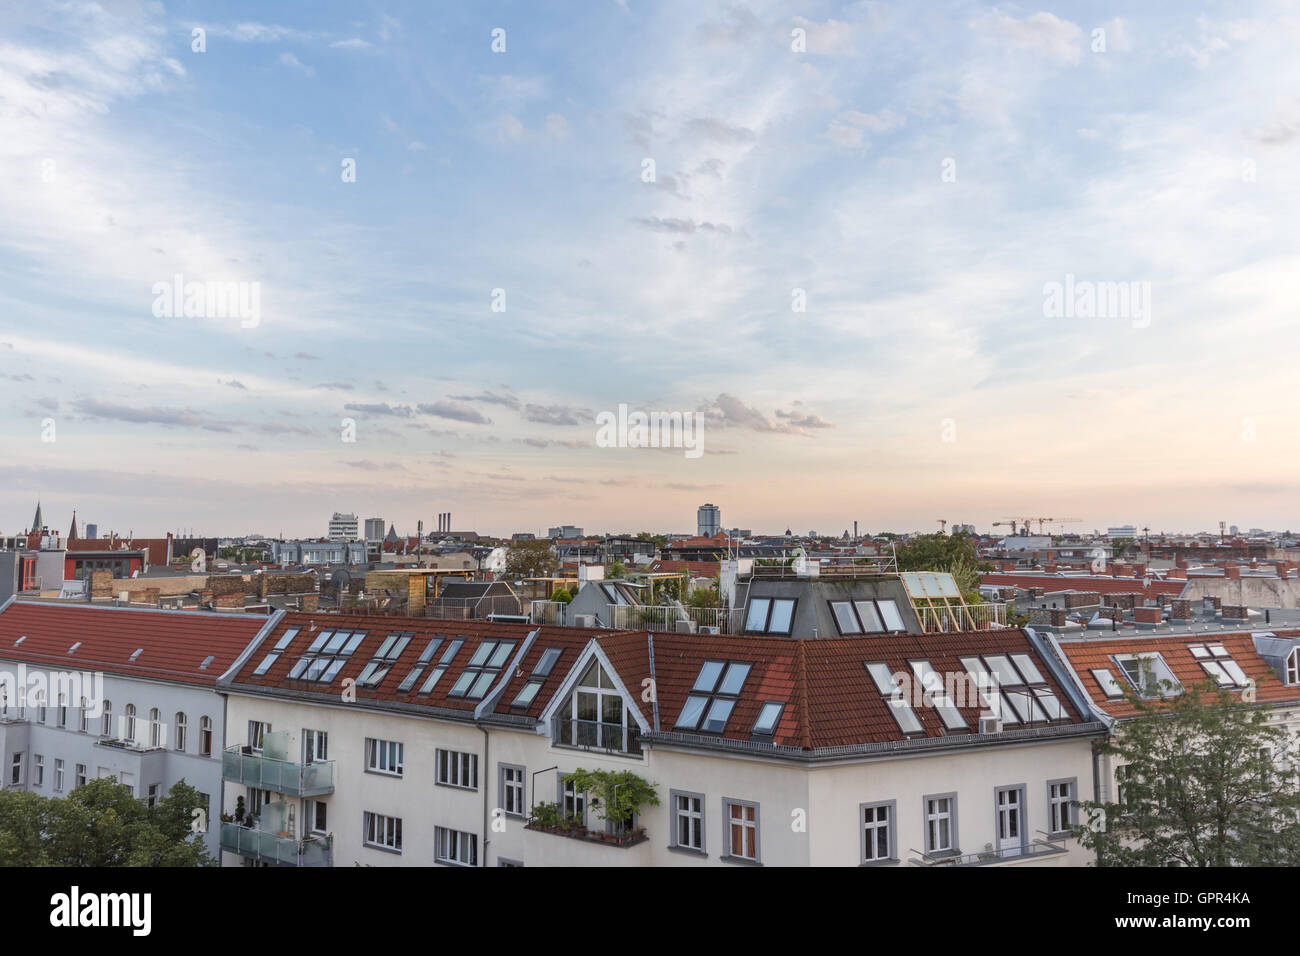 View over rooftops - city skyline at sunset Stock Photo